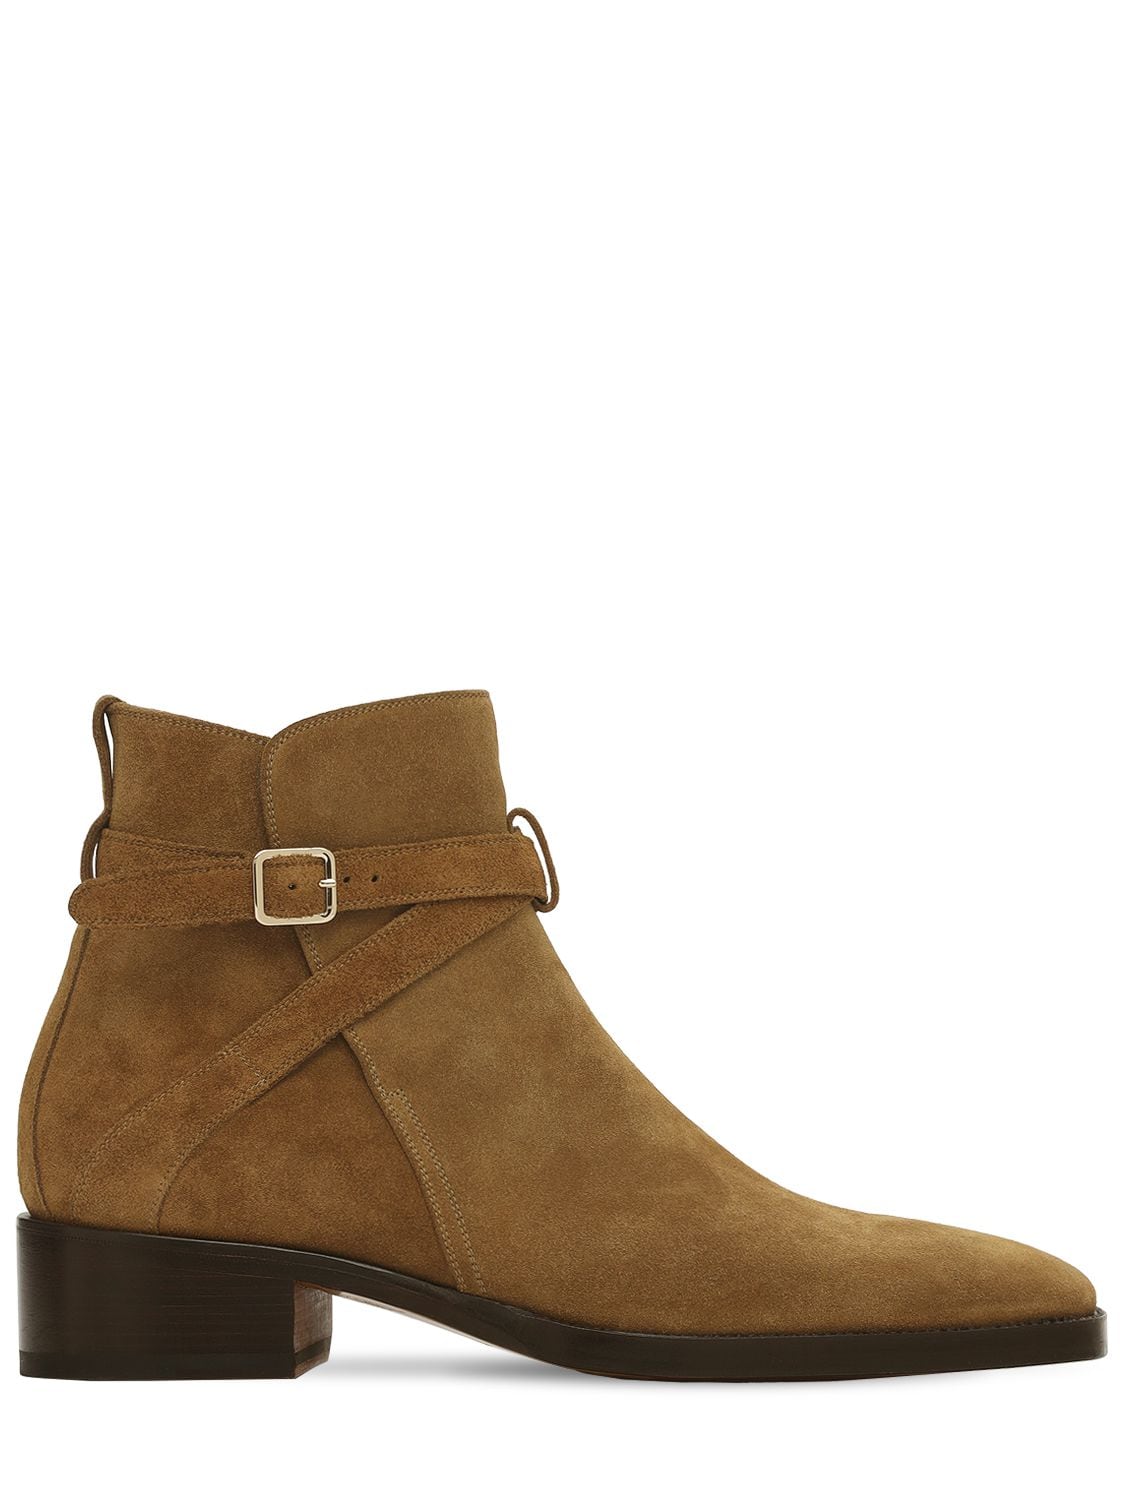 Tom Ford 40mm Rochester Suede Ankle Boots In Tan